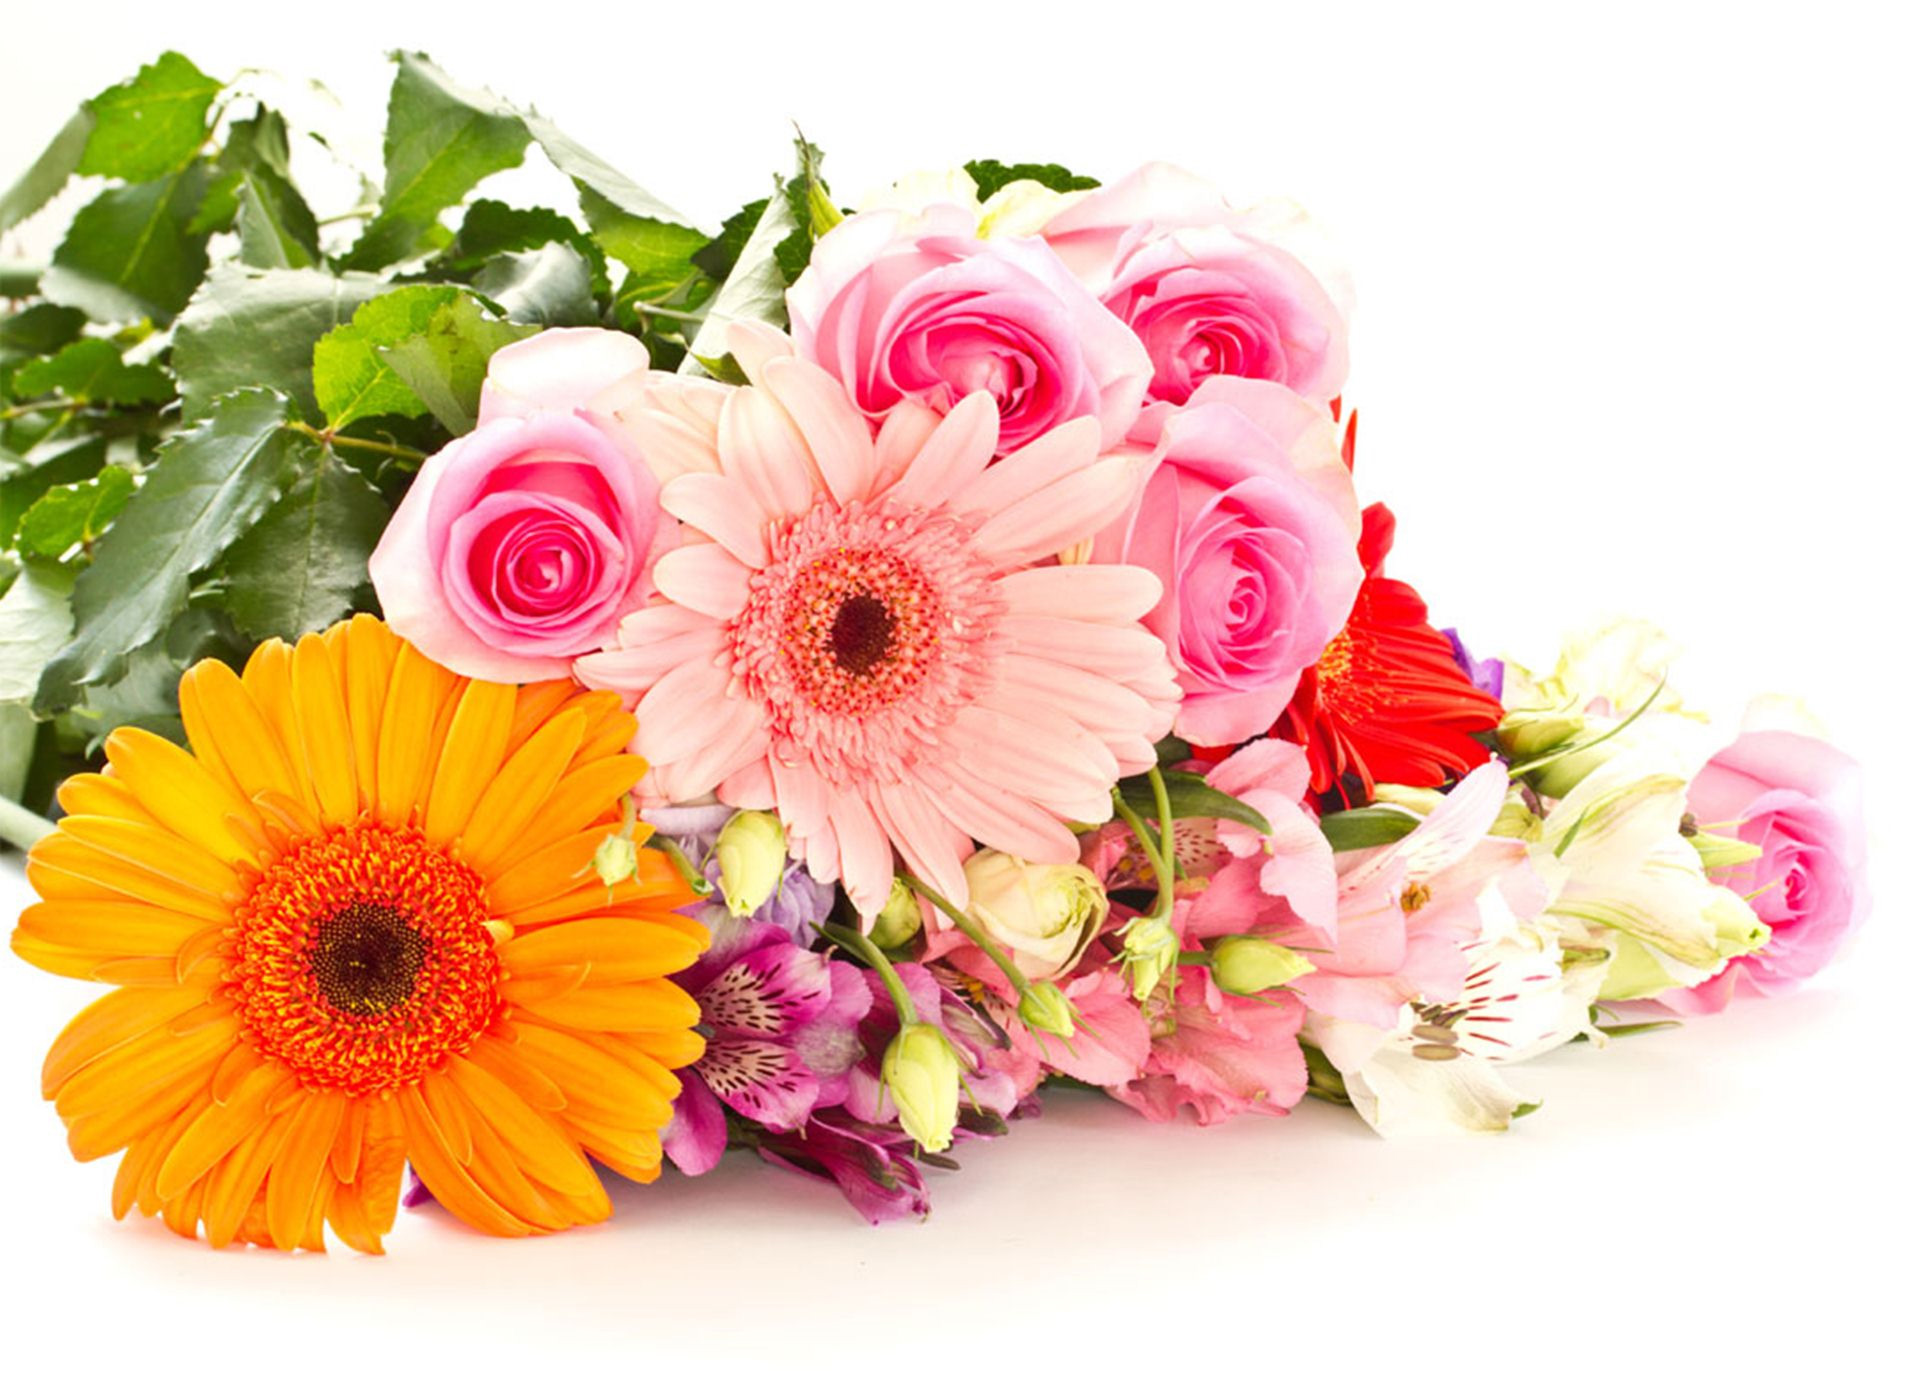 mothers day flower images free download